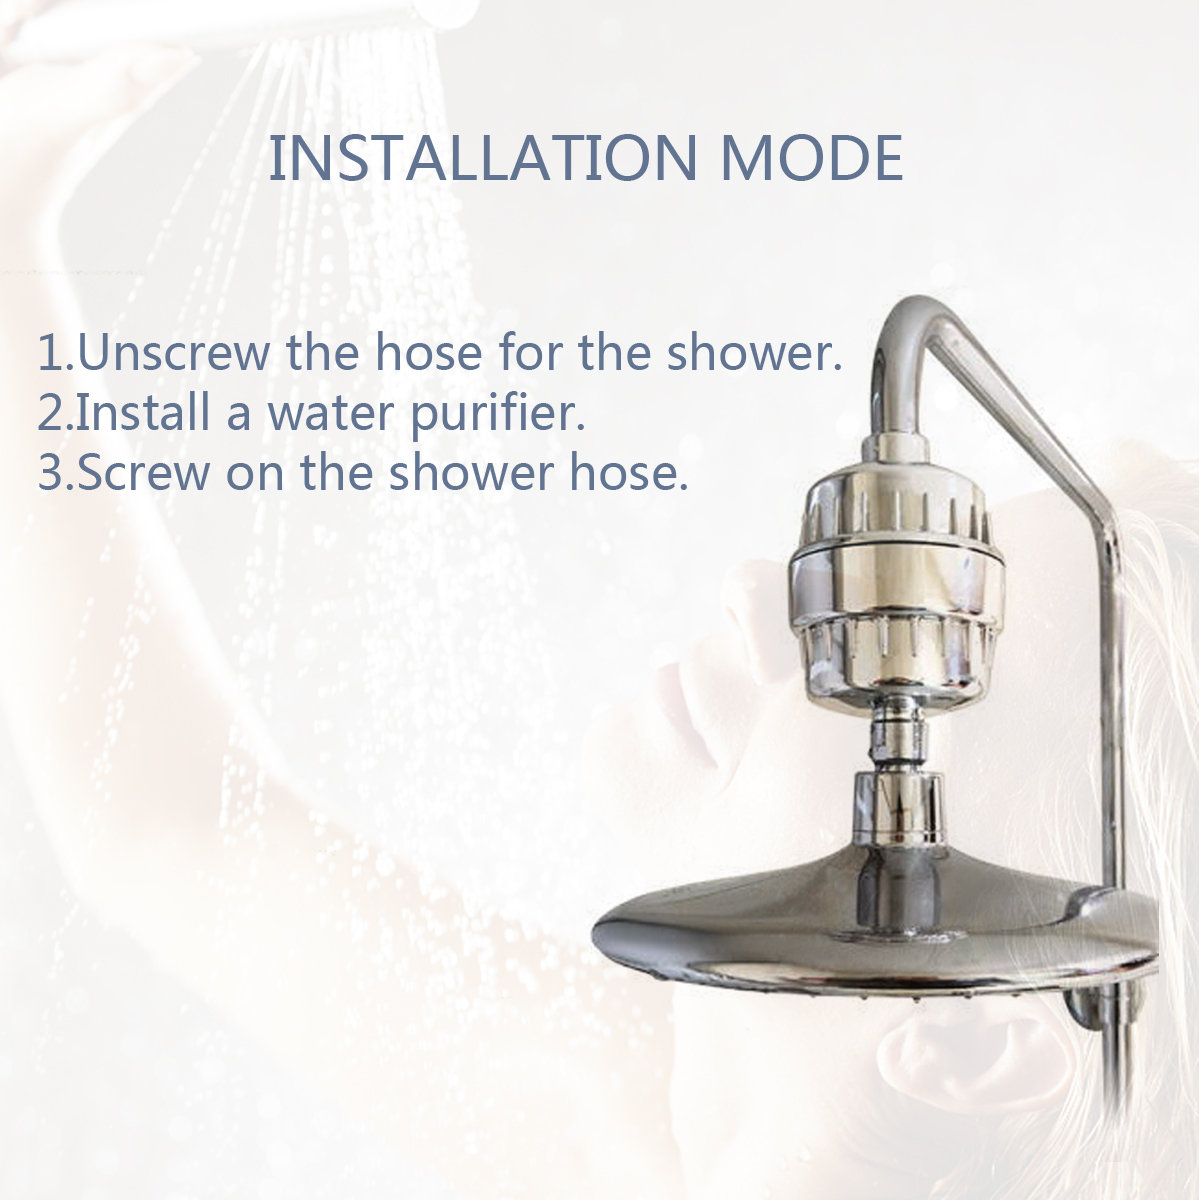 15-Stage-Shower-Water-Filter-Softener-ABS-Hard-Water-Removes-Chlorine-and-Flouride-1458900-7